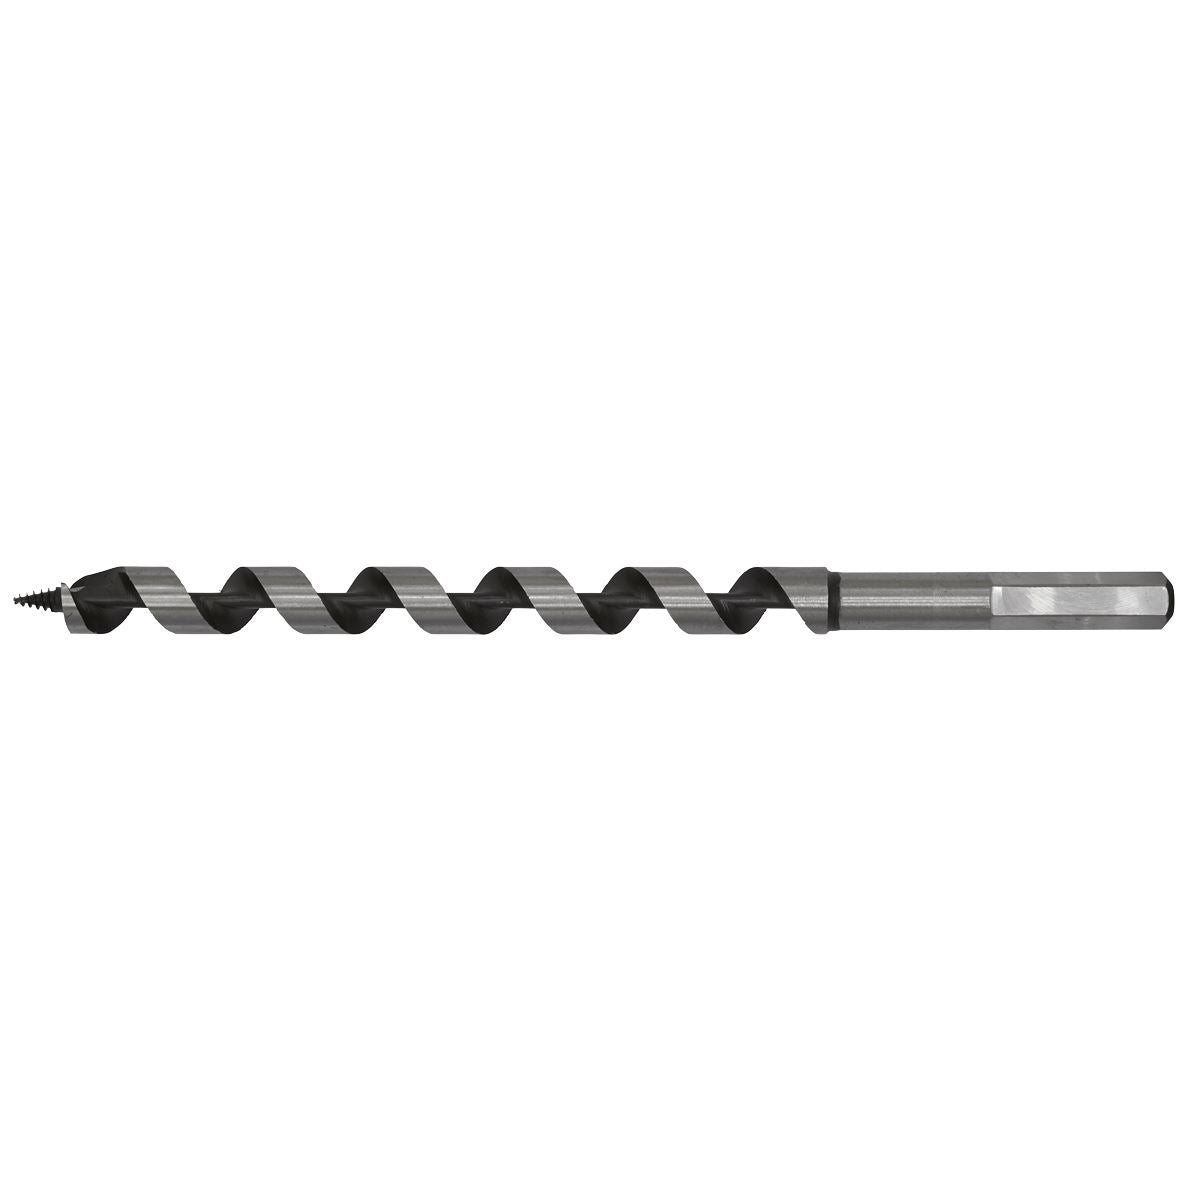 Worksafe by Sealey Auger Wood Drill Bit 14mm x 235mm